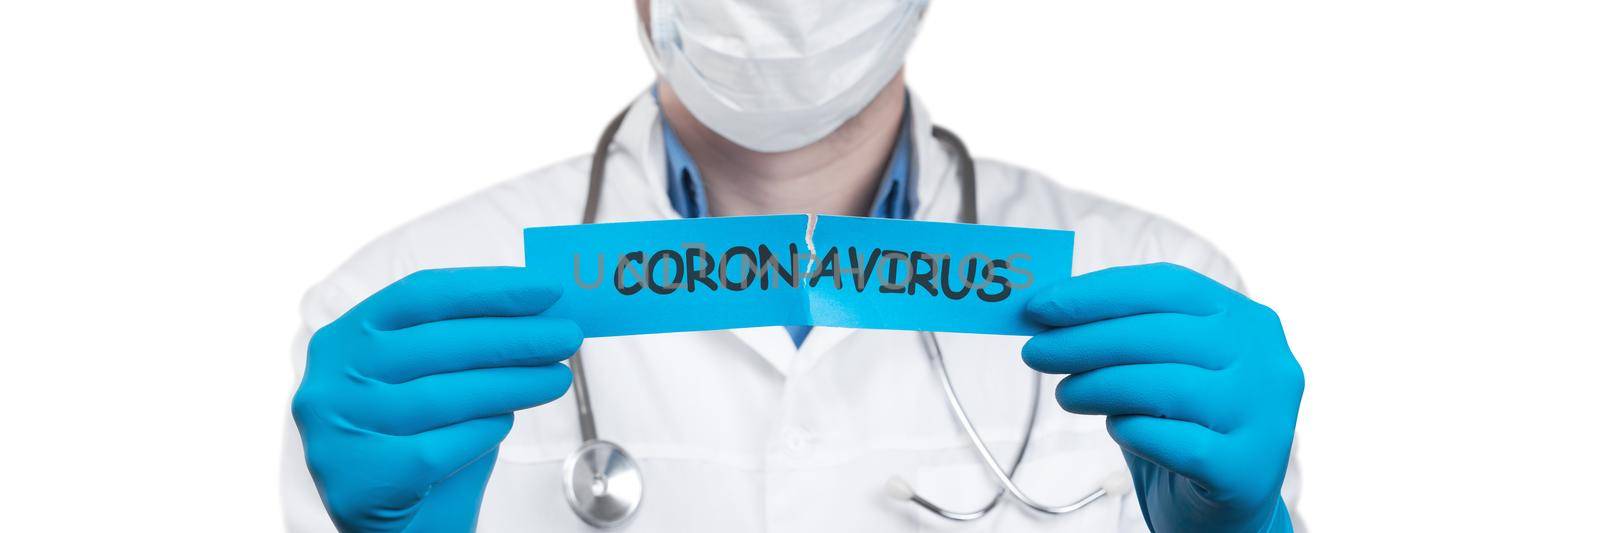 Young doctor against new Coronavirus 2019-nCoV by Taut